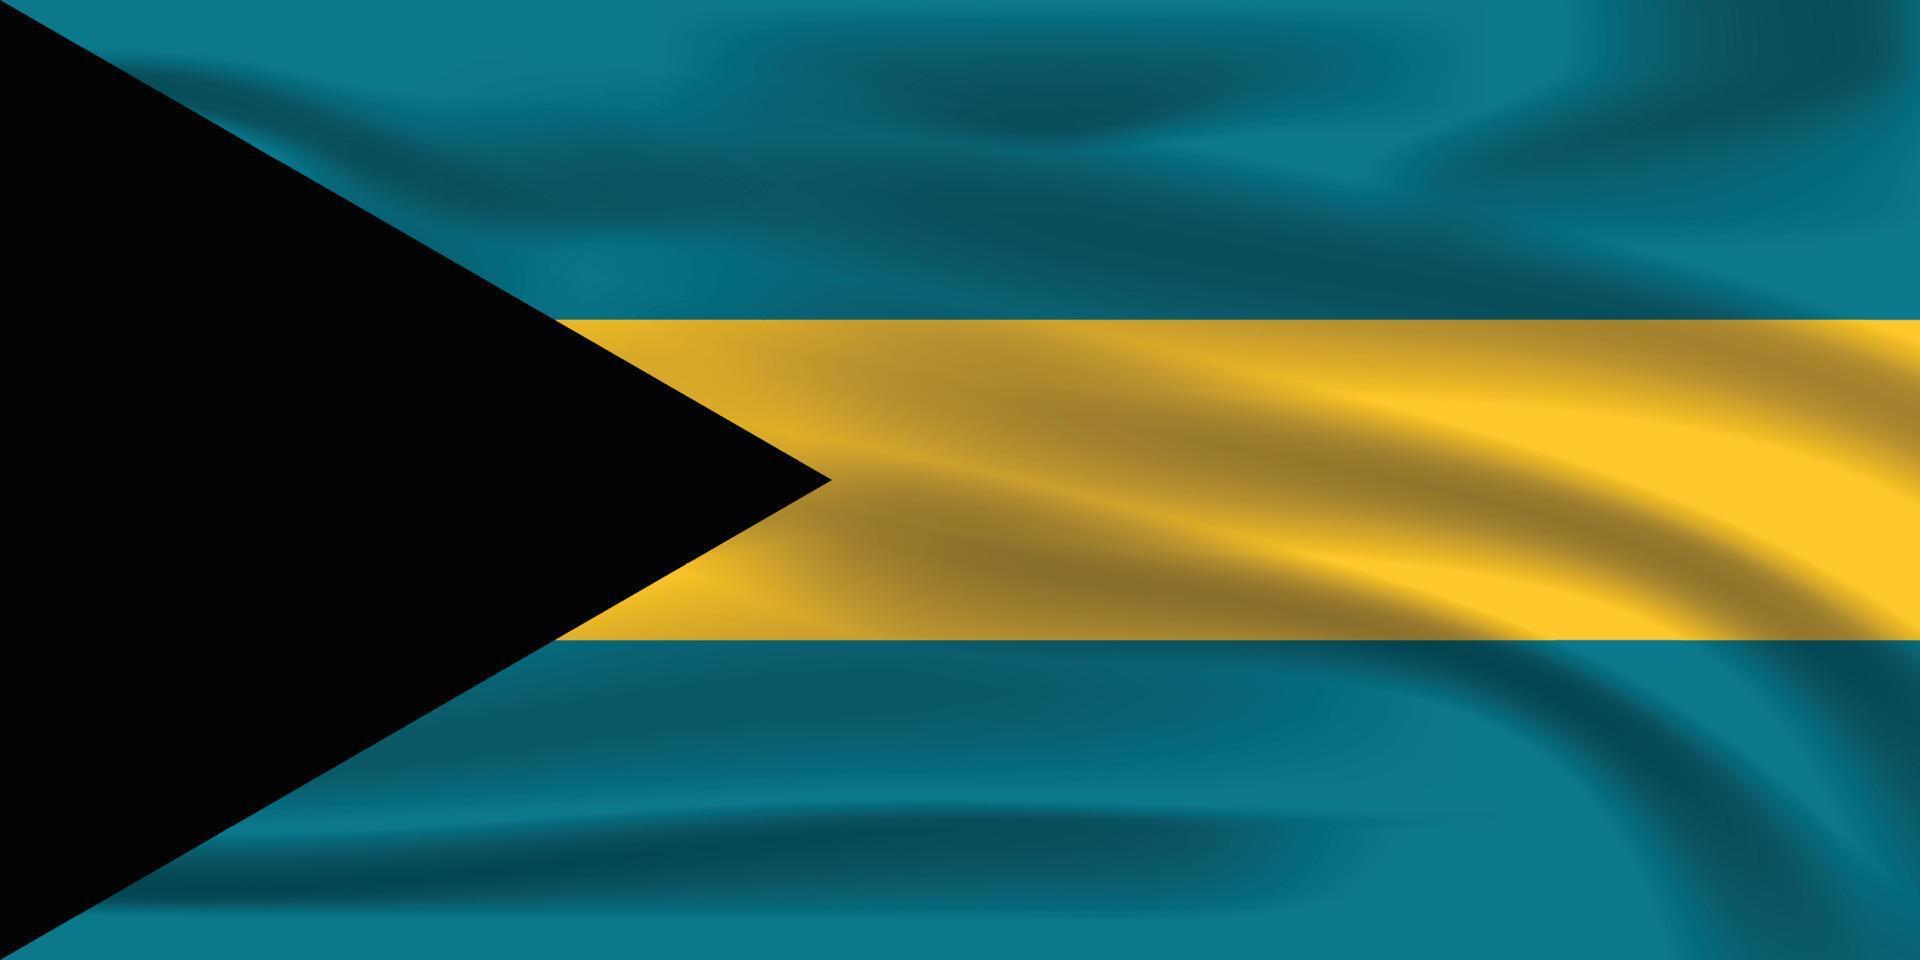 The Realistic National Flag of the Bahamas vector